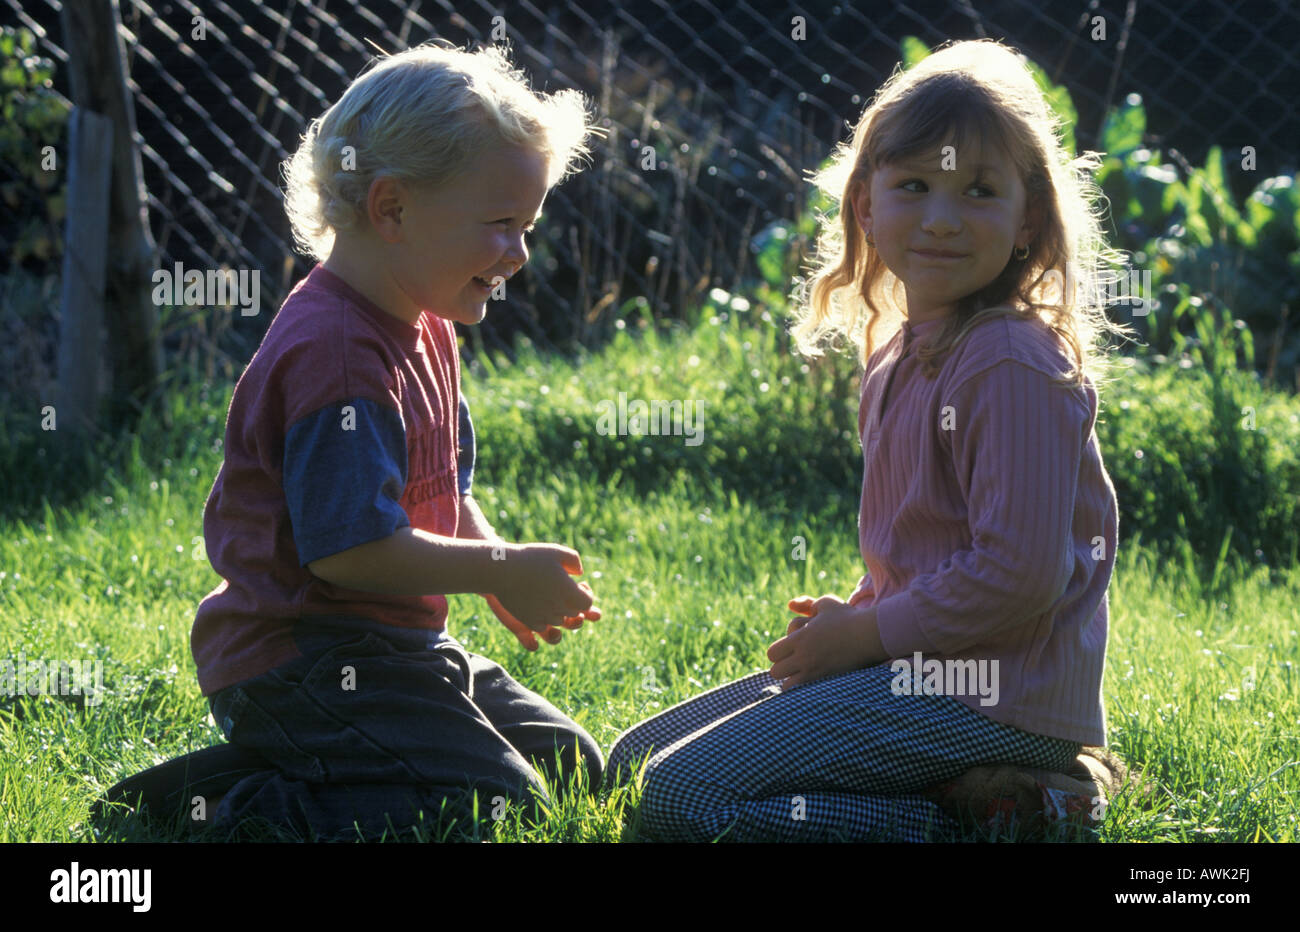 children playing together outdoors Stock Photo